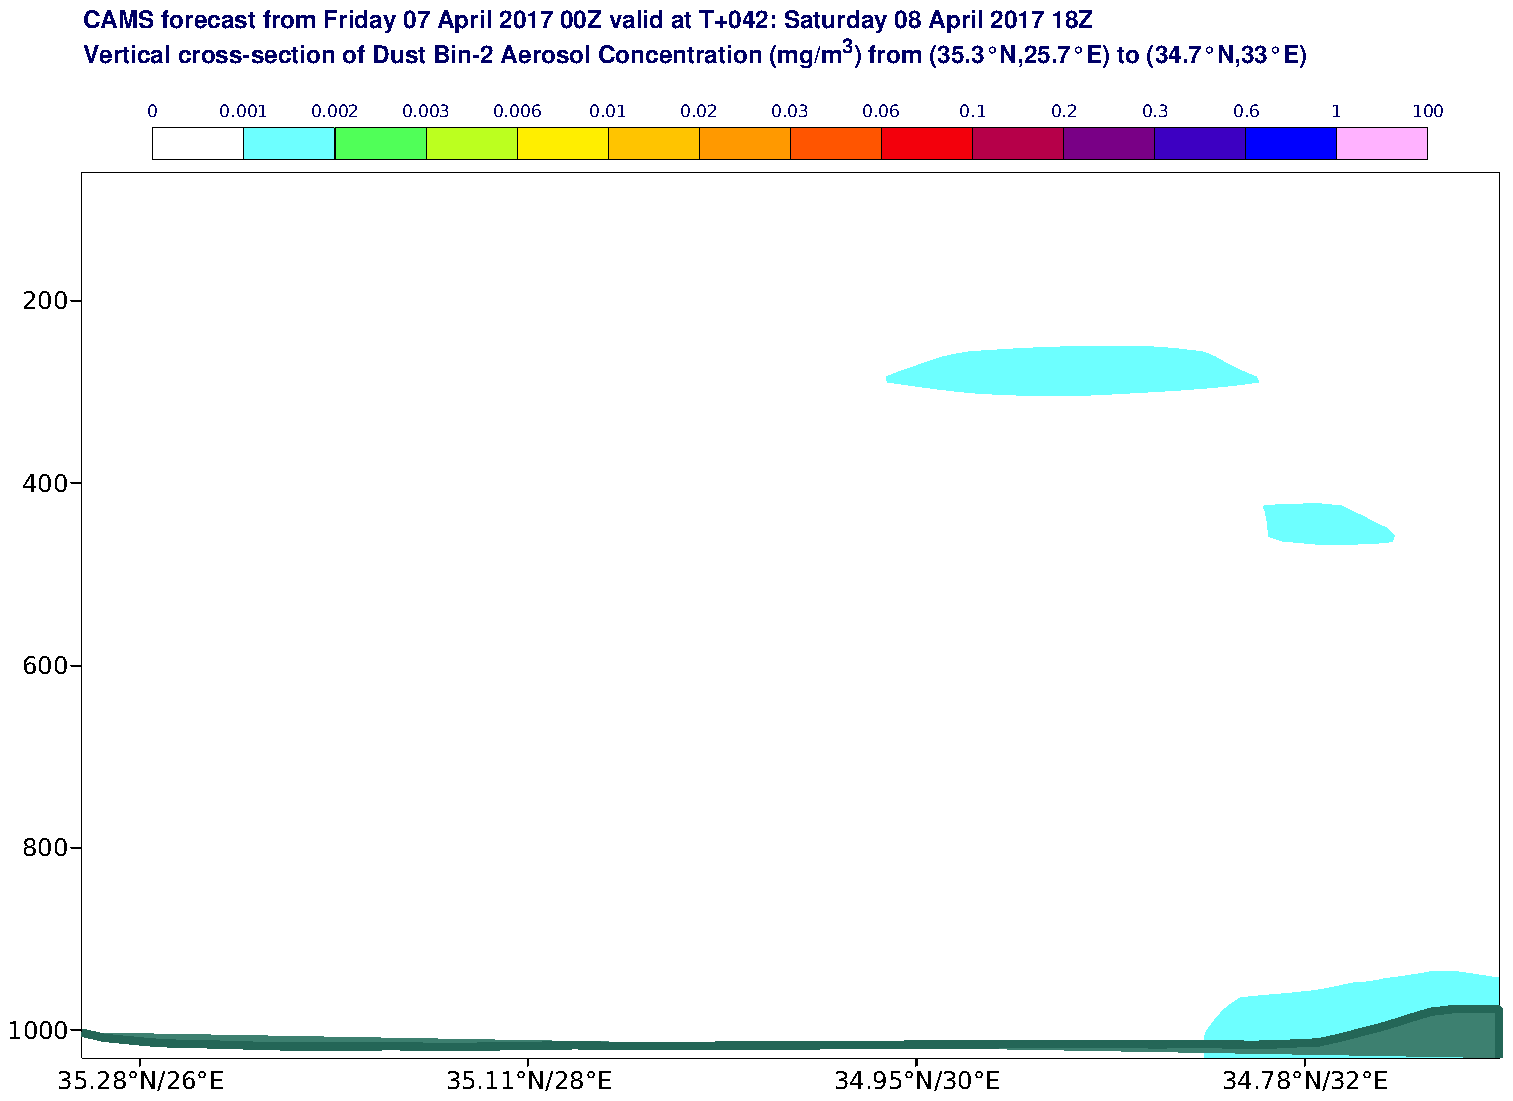 Vertical cross-section of Dust Bin-2 Aerosol Concentration (mg/m3) valid at T42 - 2017-04-08 18:00